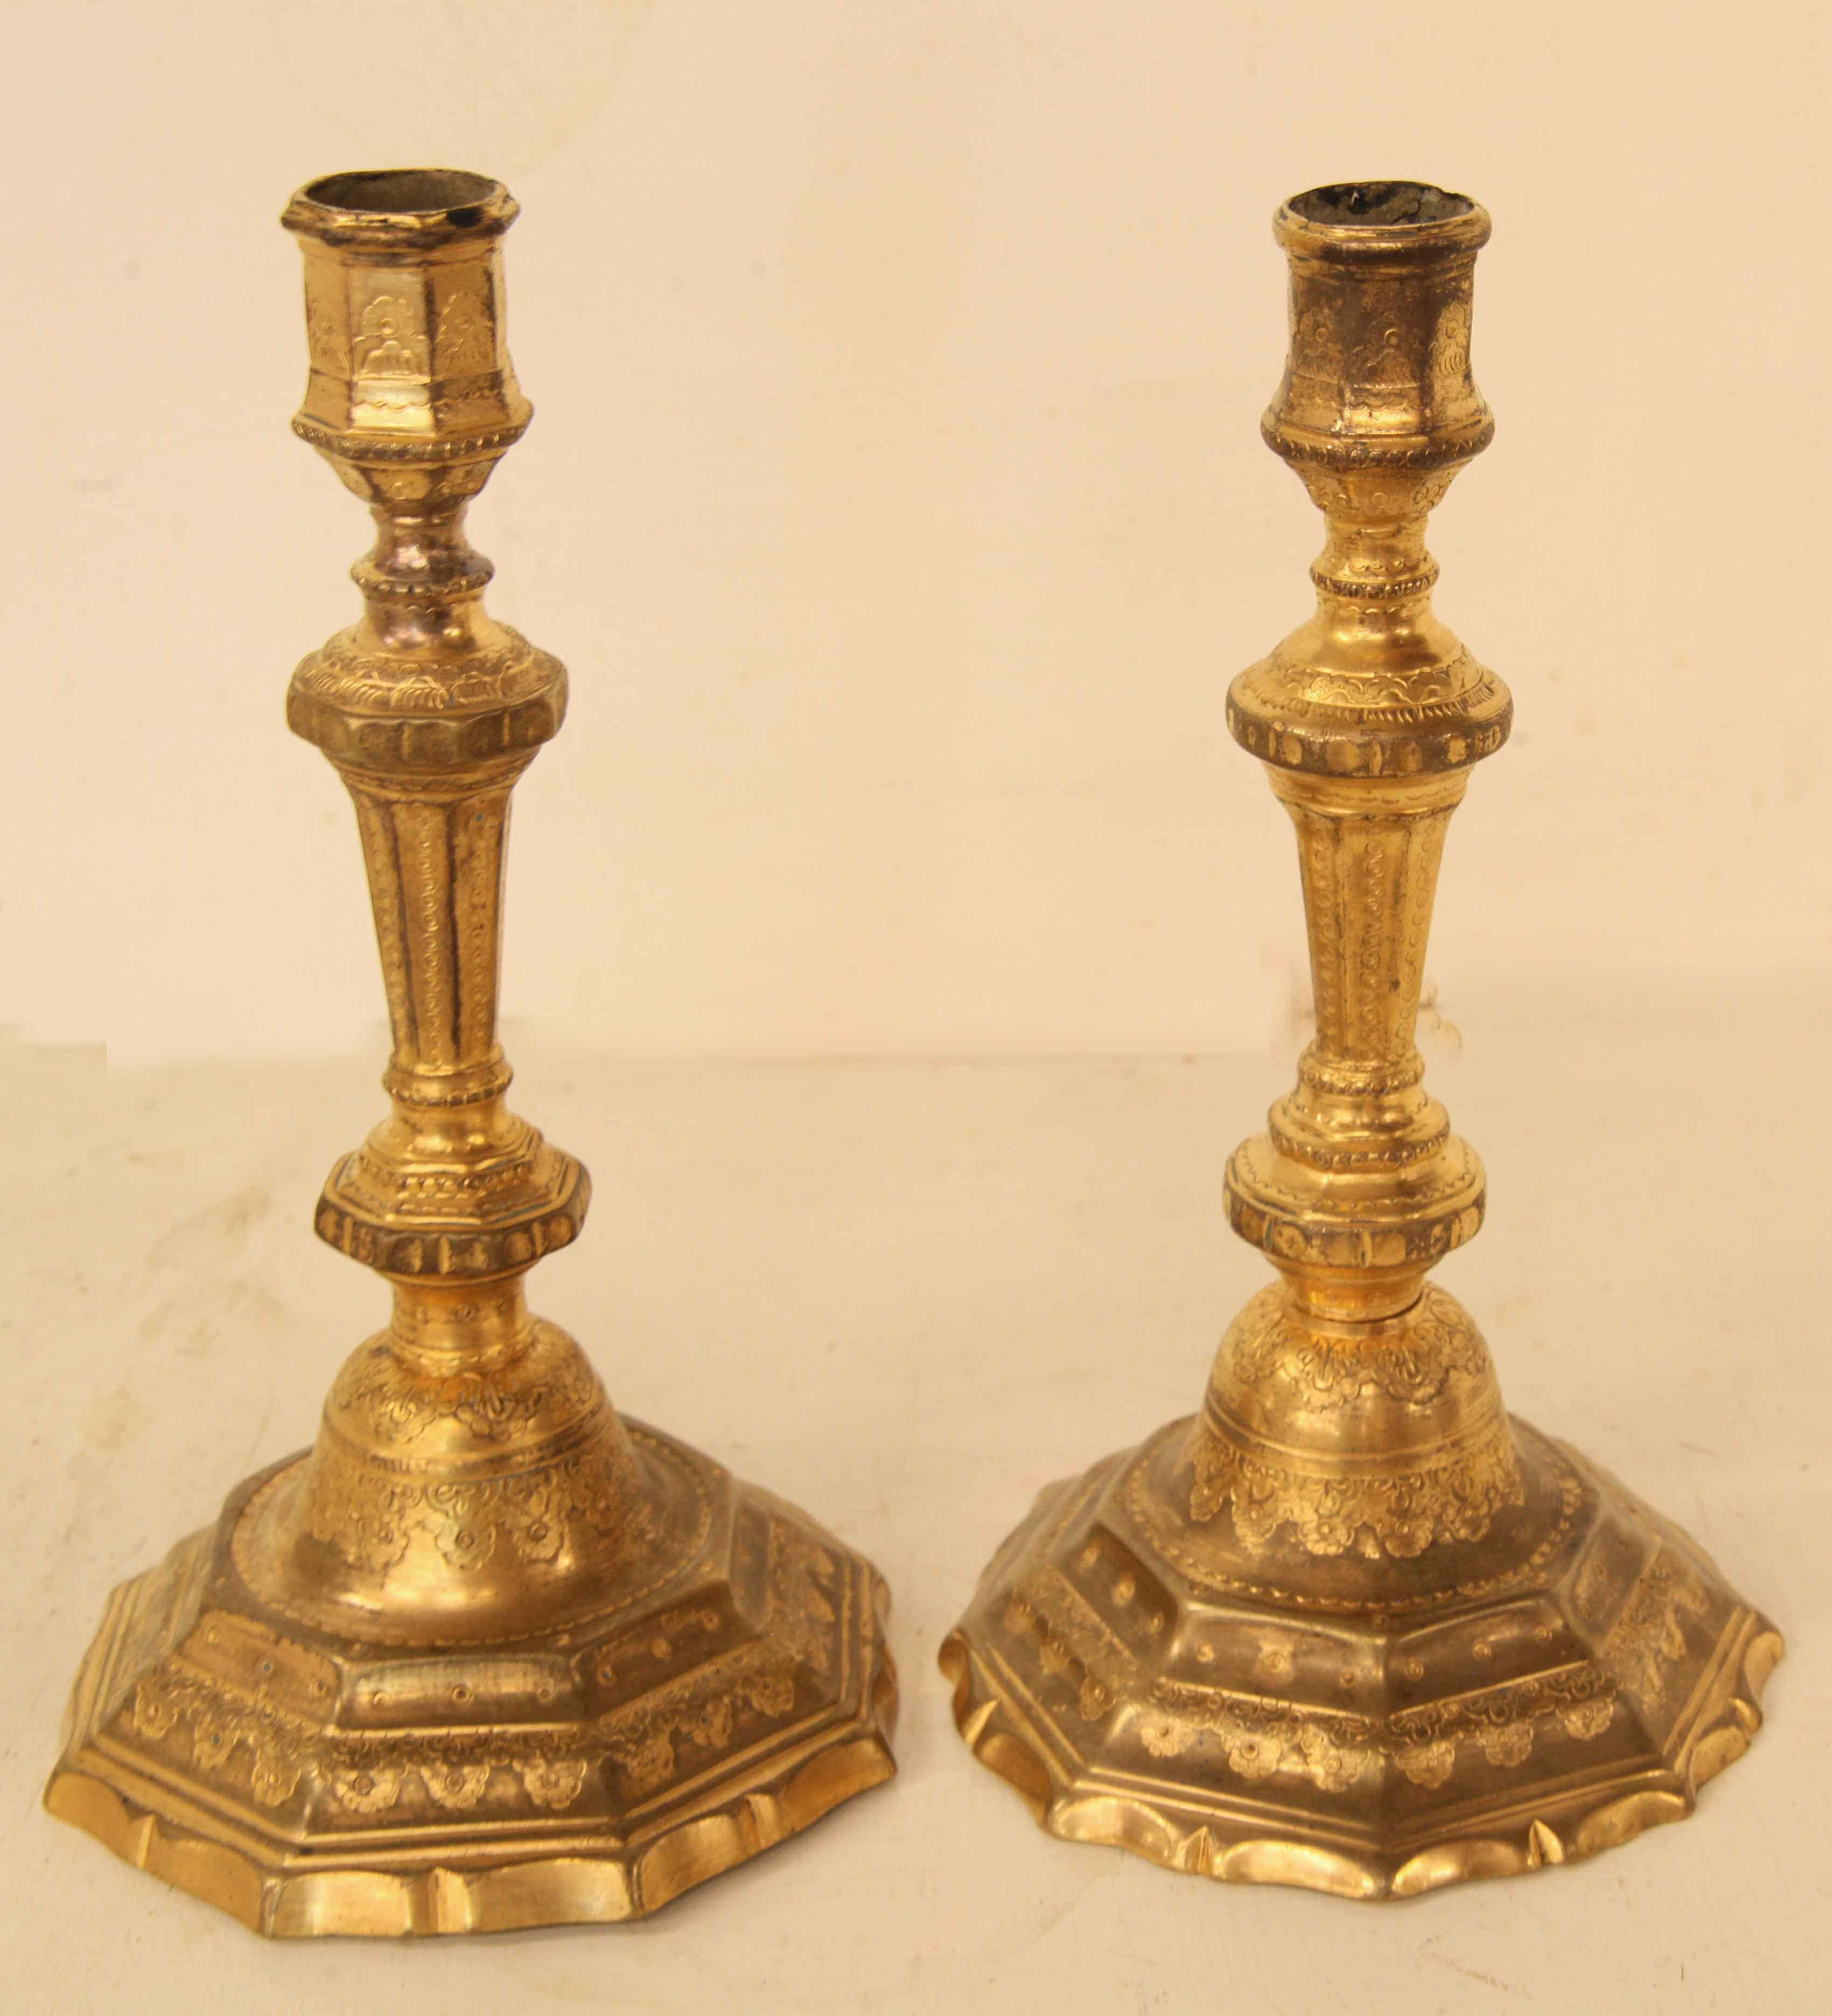 Pair of French Gilt and Chased Candlesticks For Sale 6